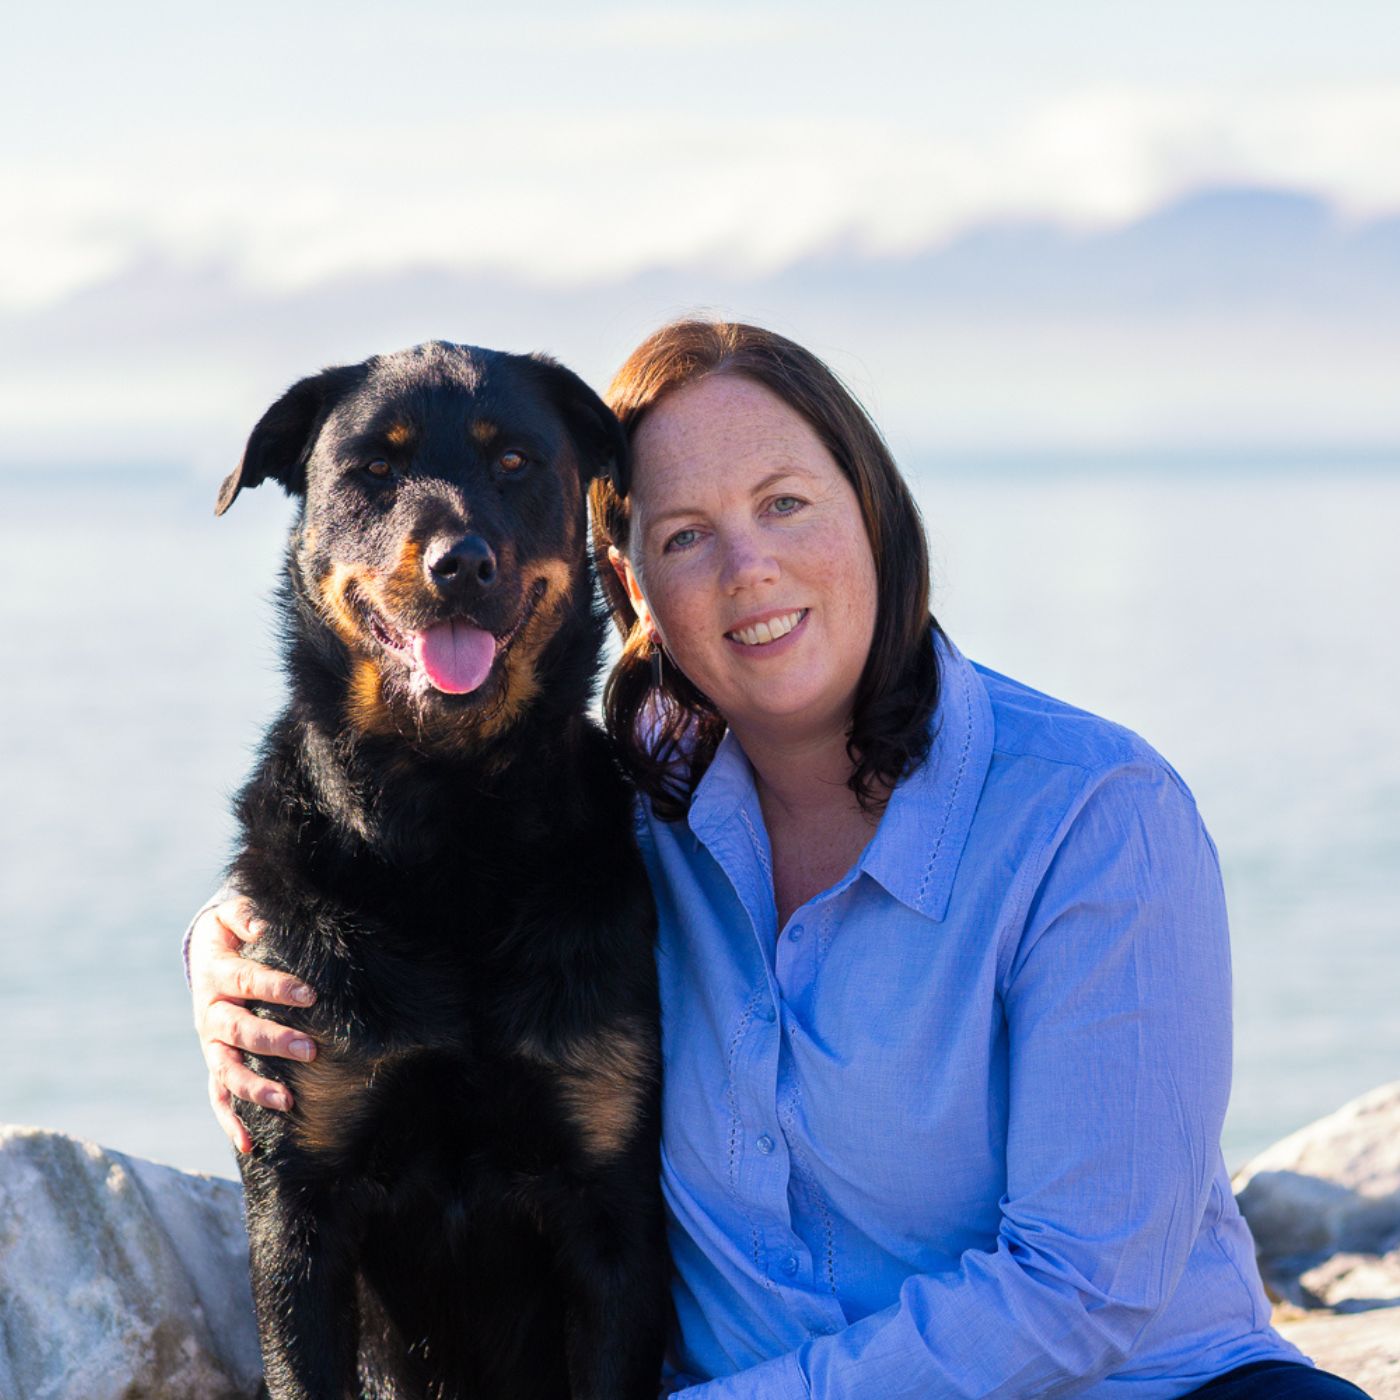 NZ veterinarian Dr Paula Short who made Genius dog food with Roxy the Rottweiler